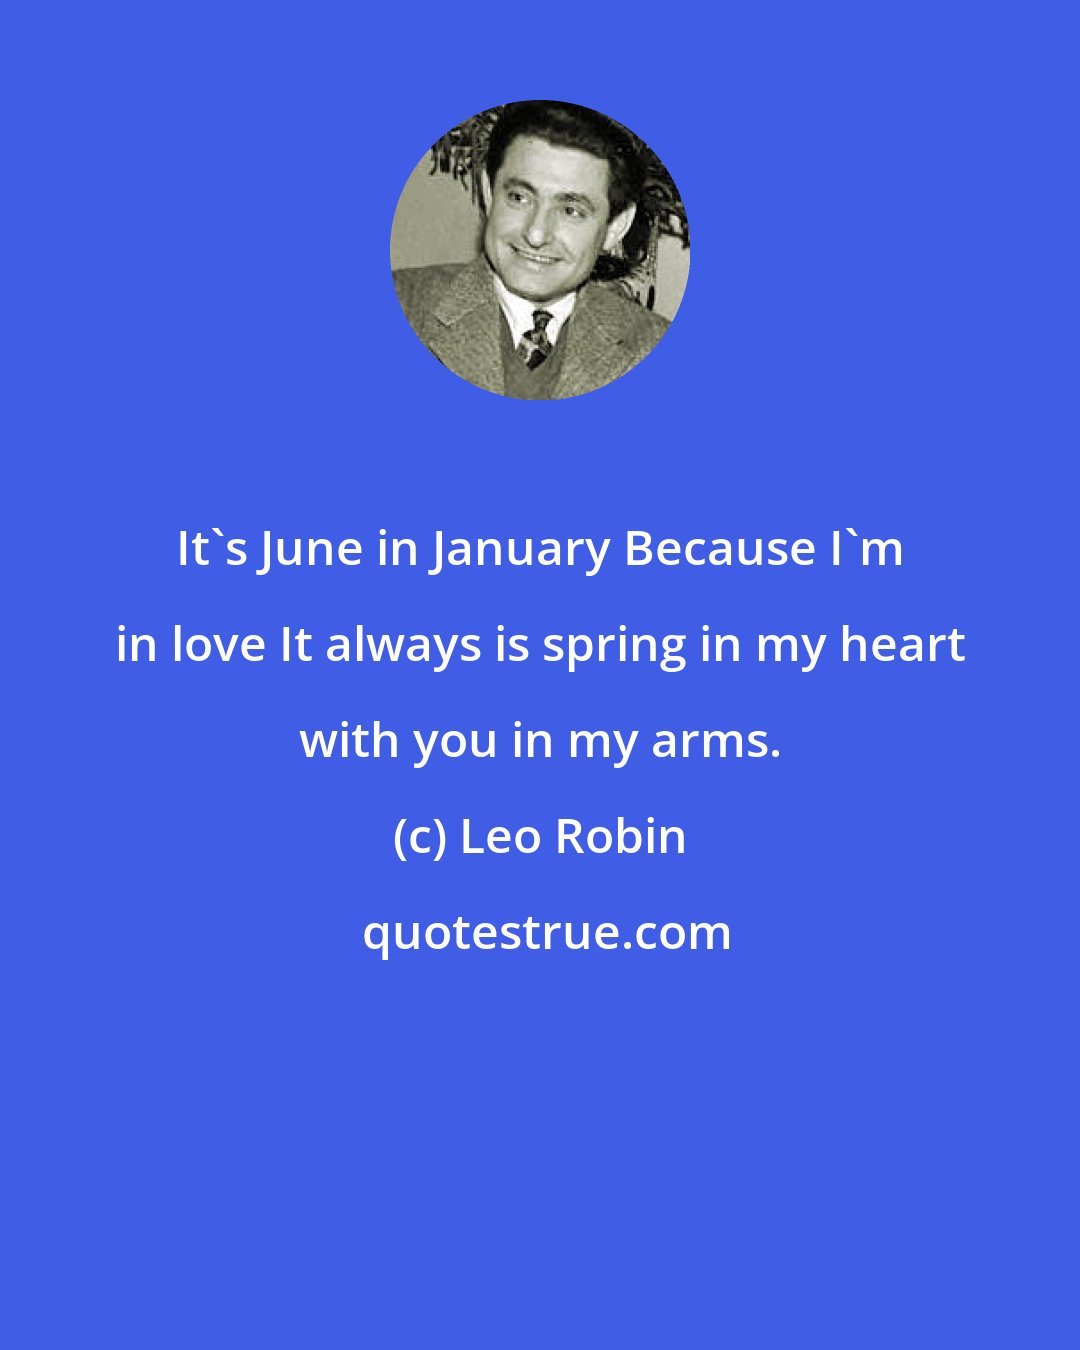 Leo Robin: It's June in January Because I'm in love It always is spring in my heart with you in my arms.